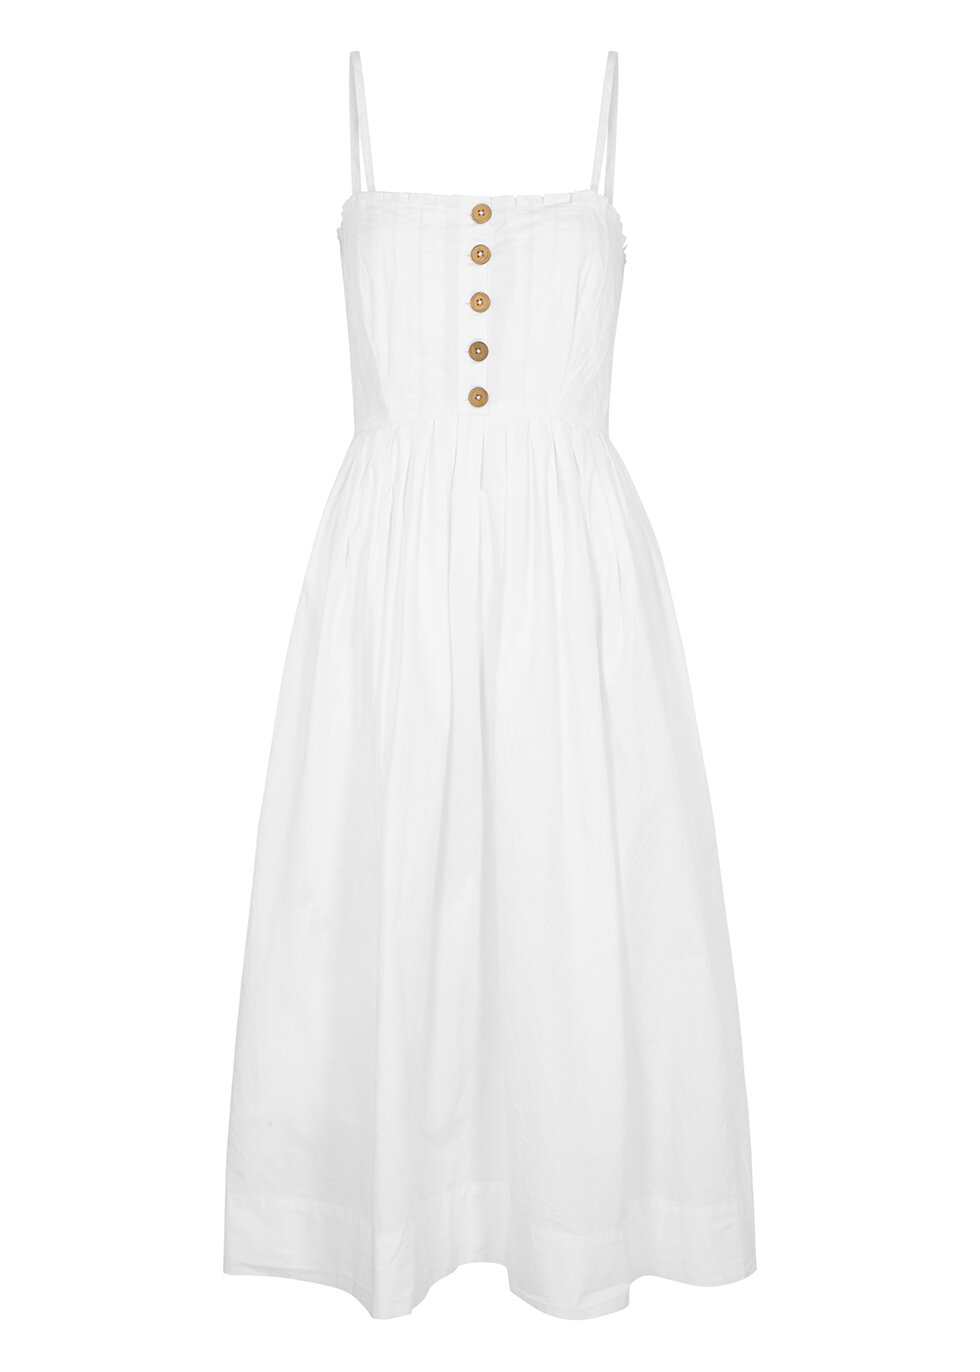 The 10 best white dresses to wear this summer | Hood Magazine